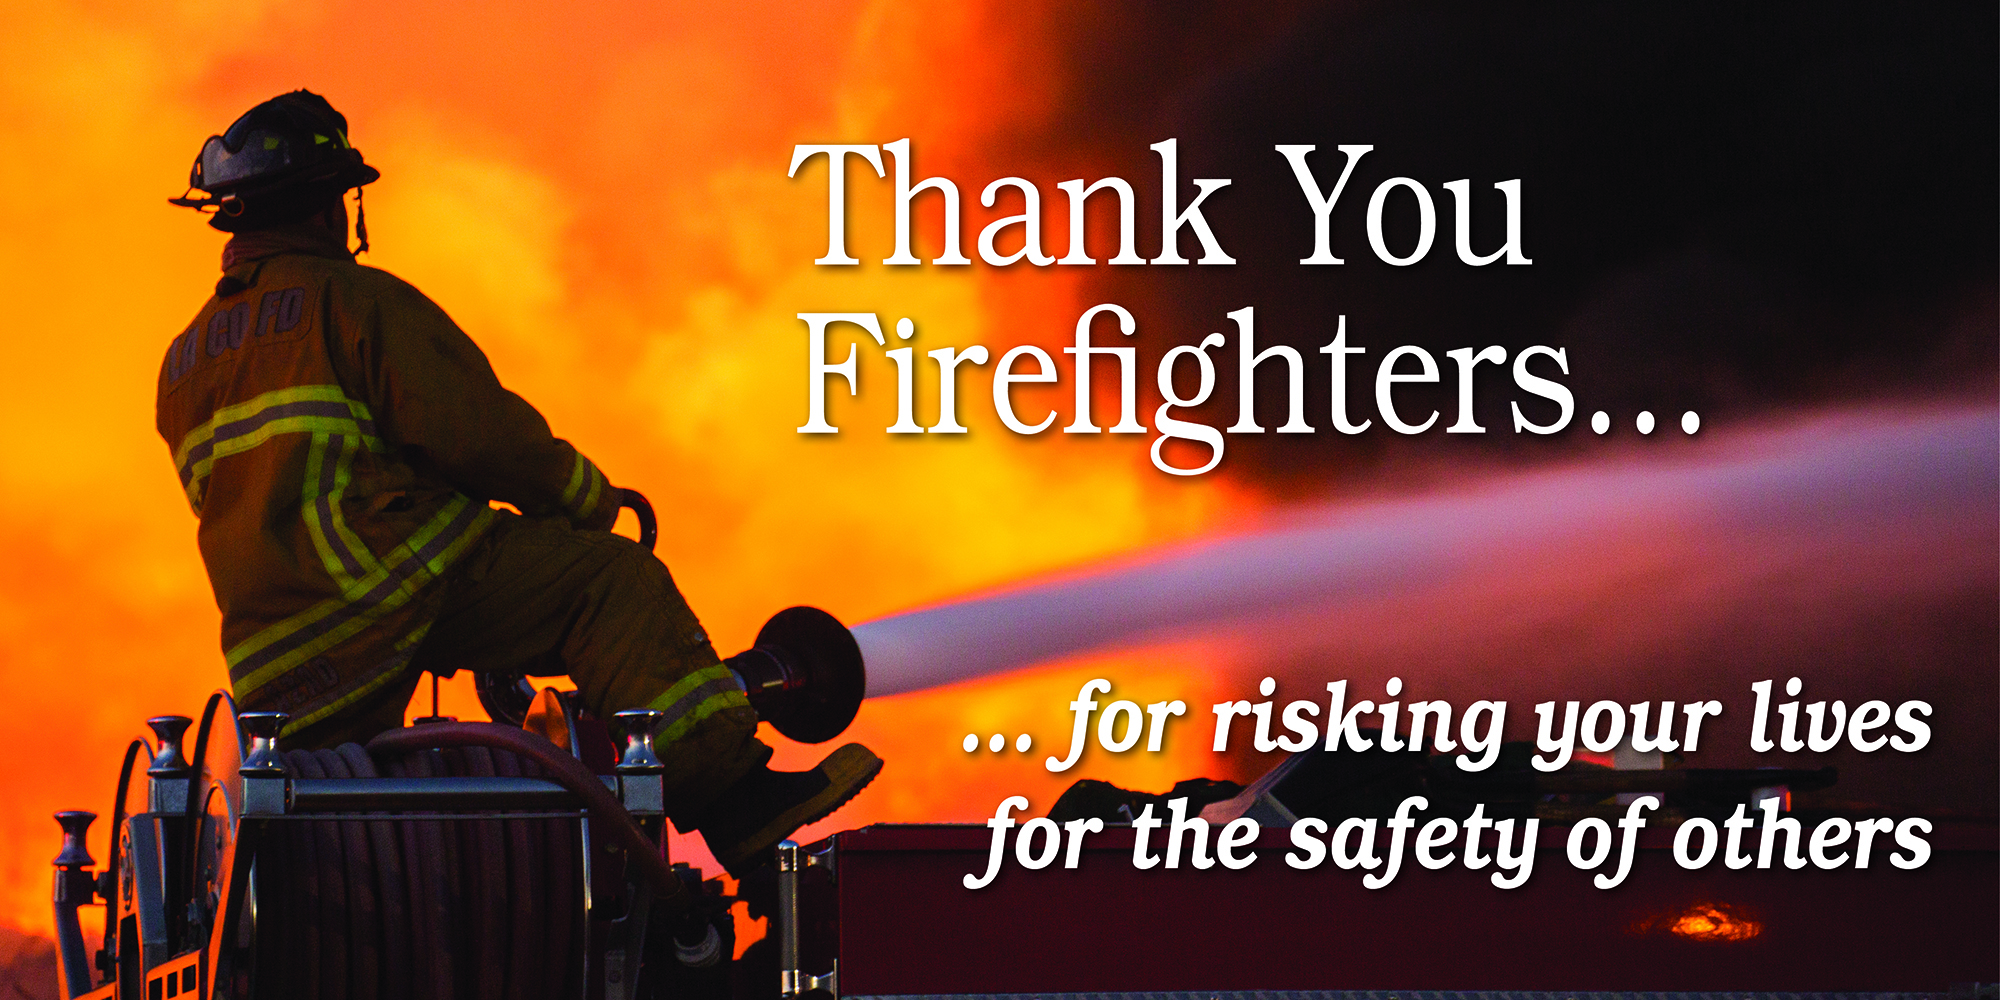 Thank you firefighters for risking your lives for the safety of others